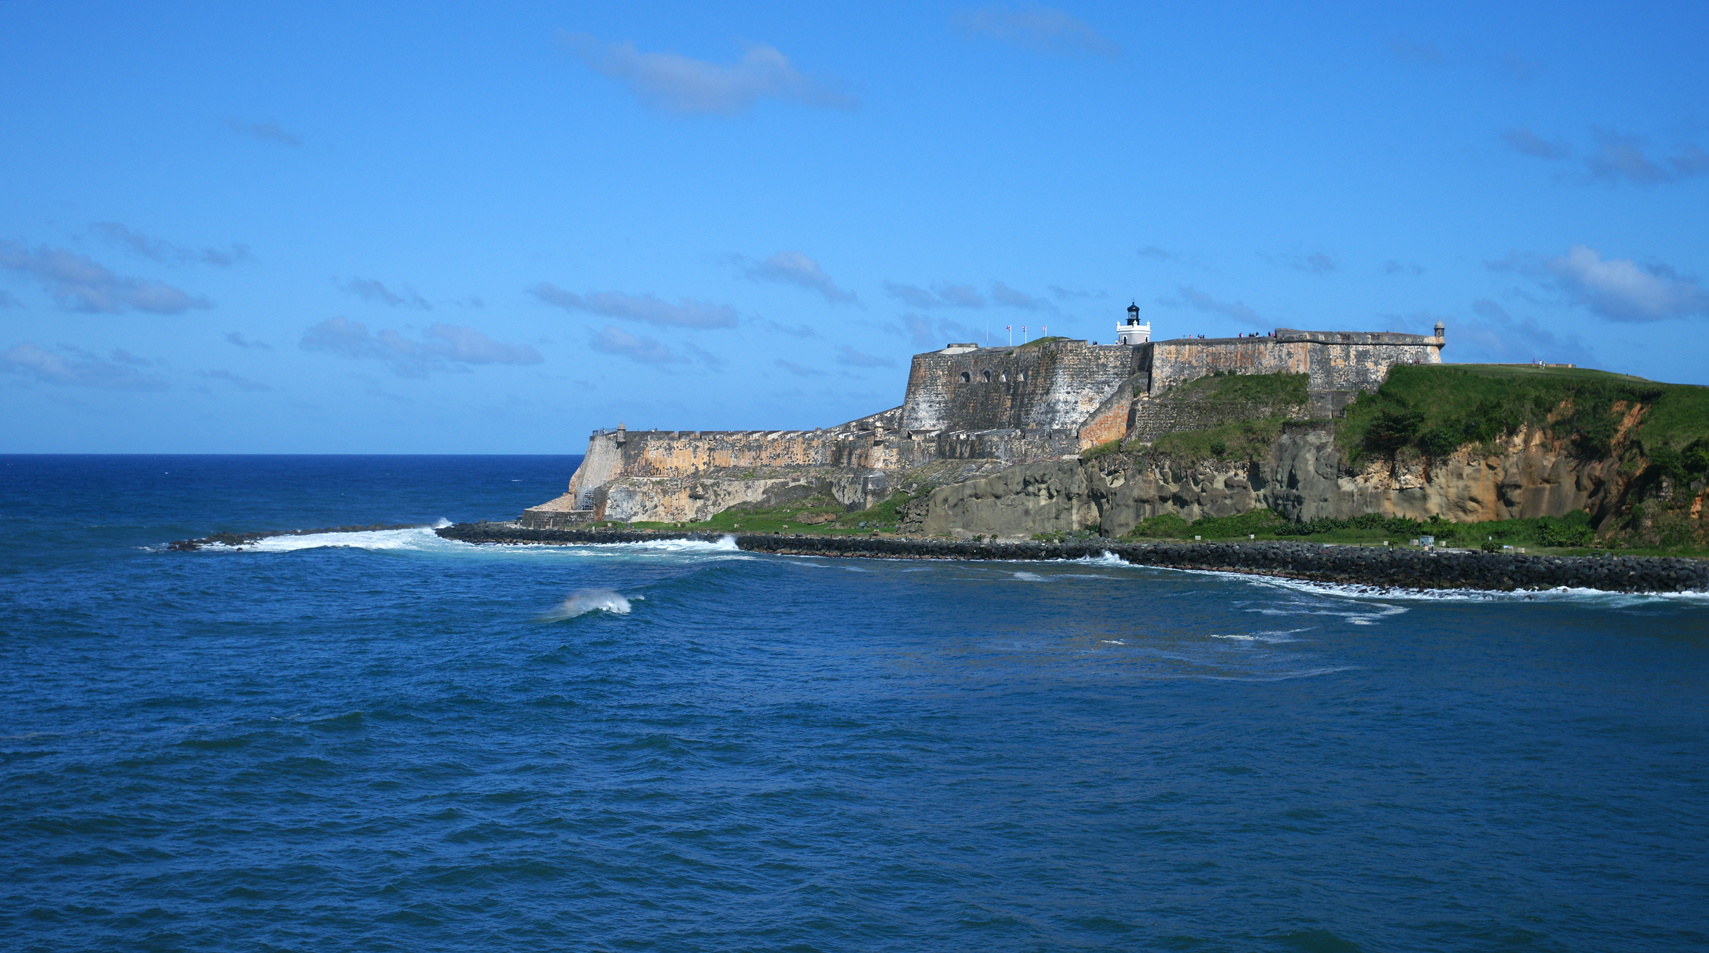 Another view of the Old San Juan Fortifications, looking towards the island from the sea.